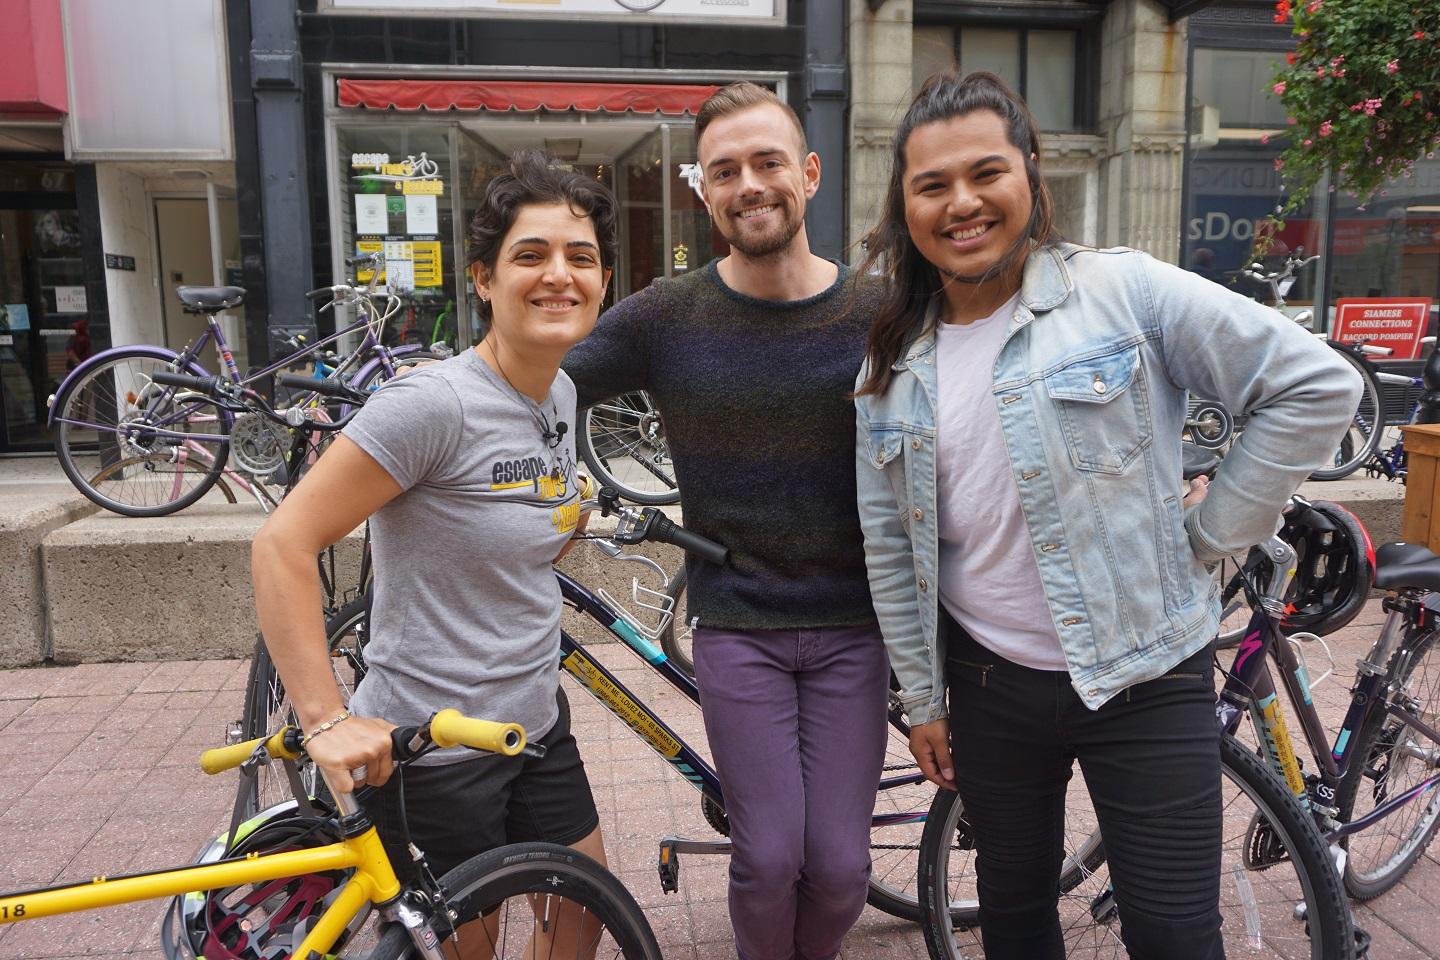 Brett and Cameron with a staff member of Escape Bicycles, outside the store